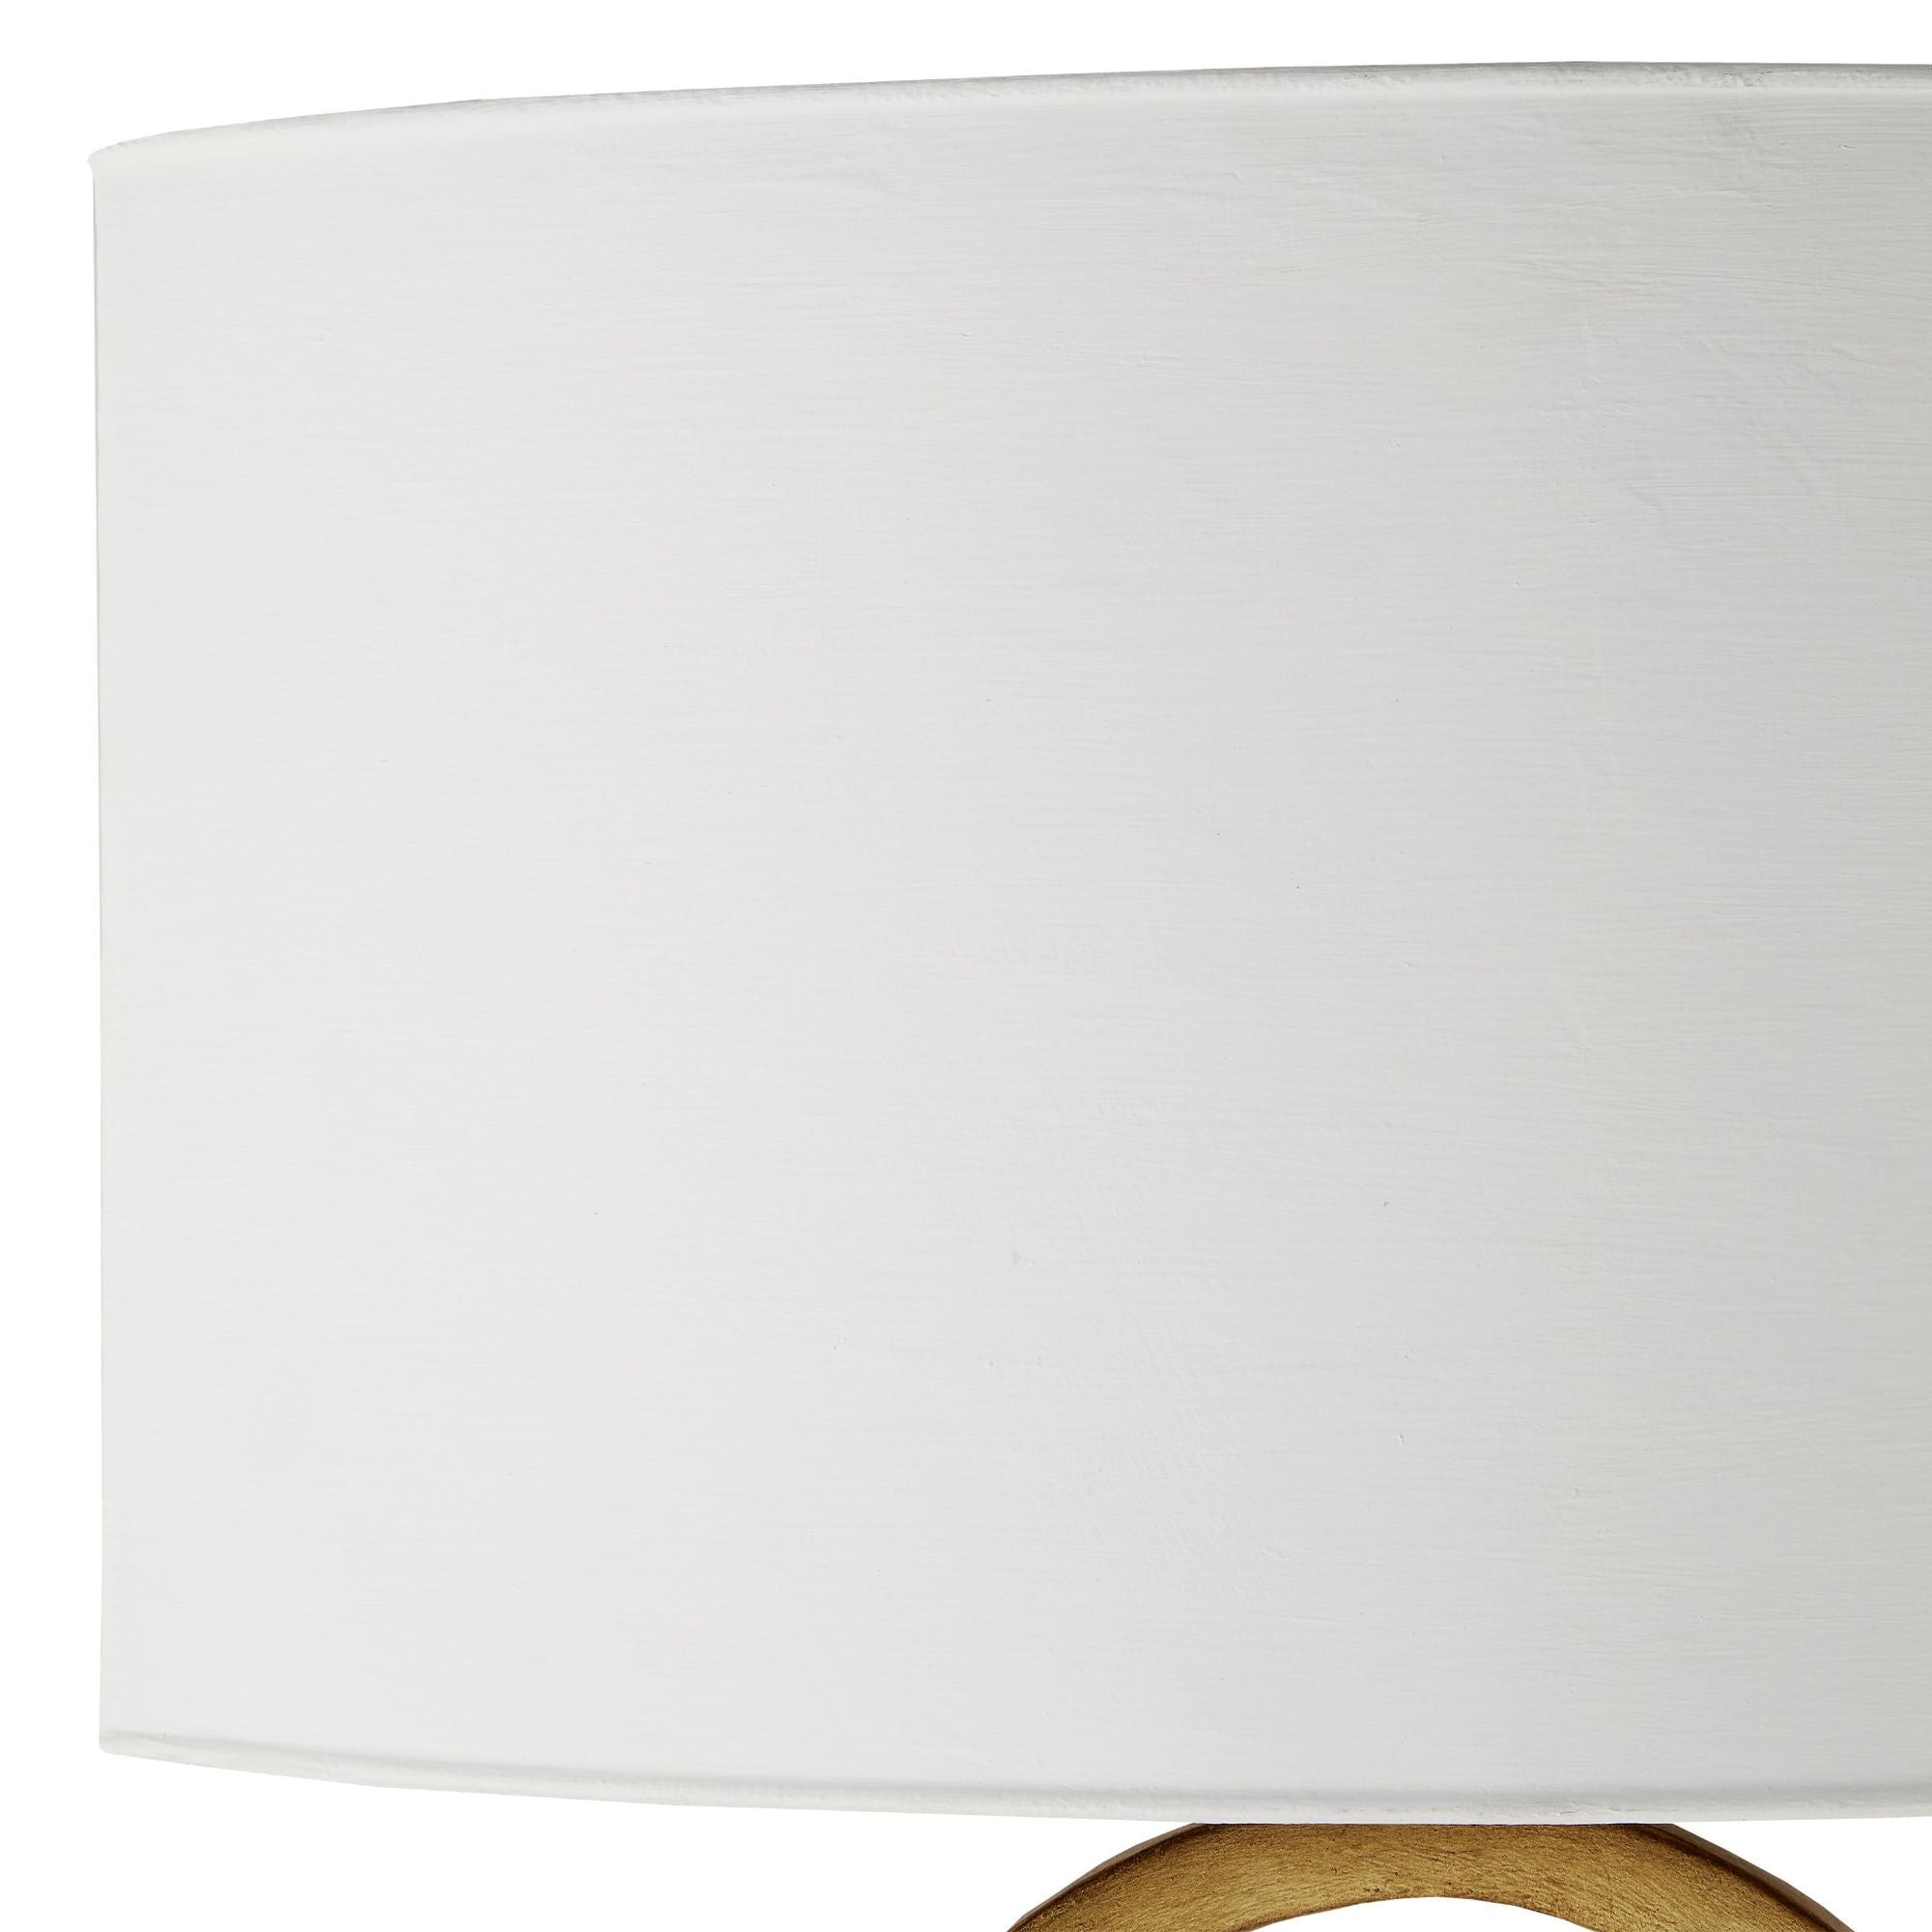 Bolebrook White Wall Sconce, White Shade - Gesso White/Contemporary Gold Leaf